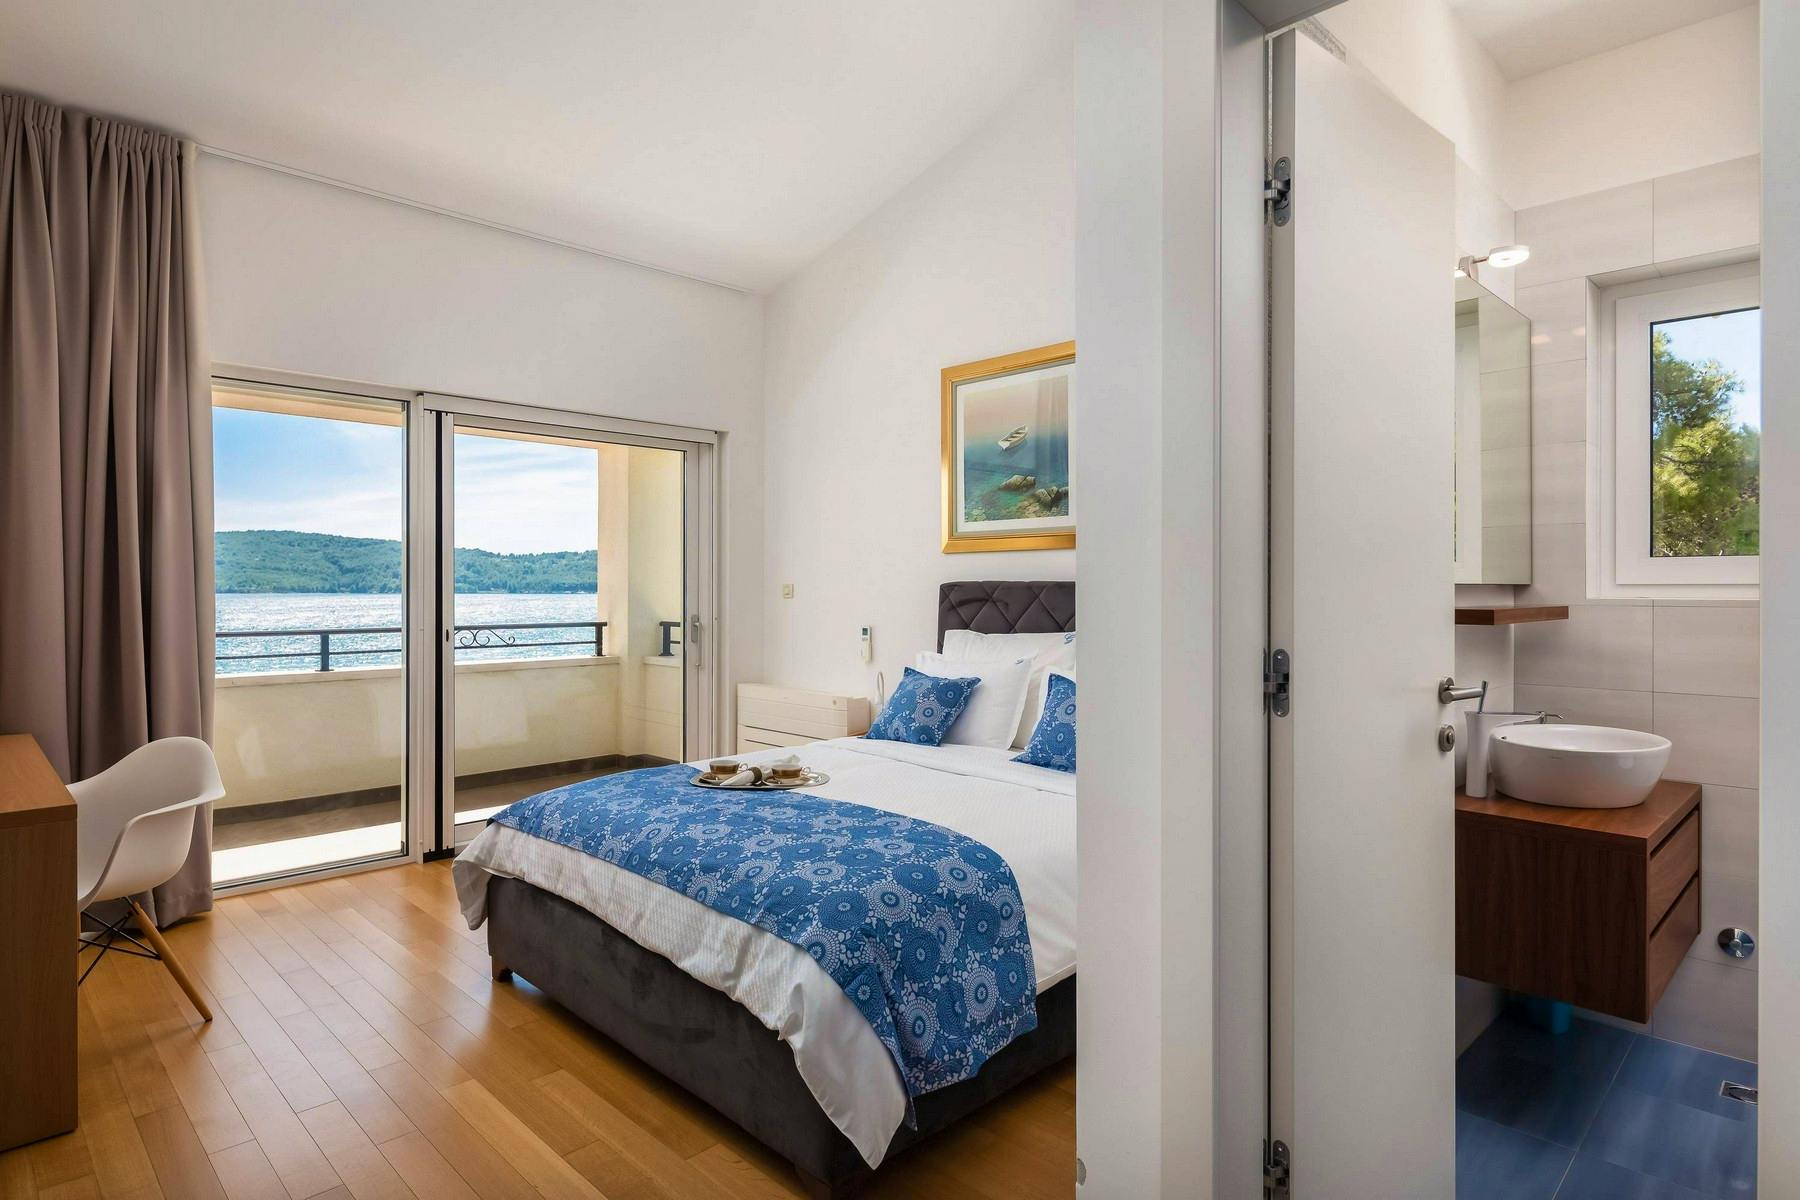 Master bedroom with seaview